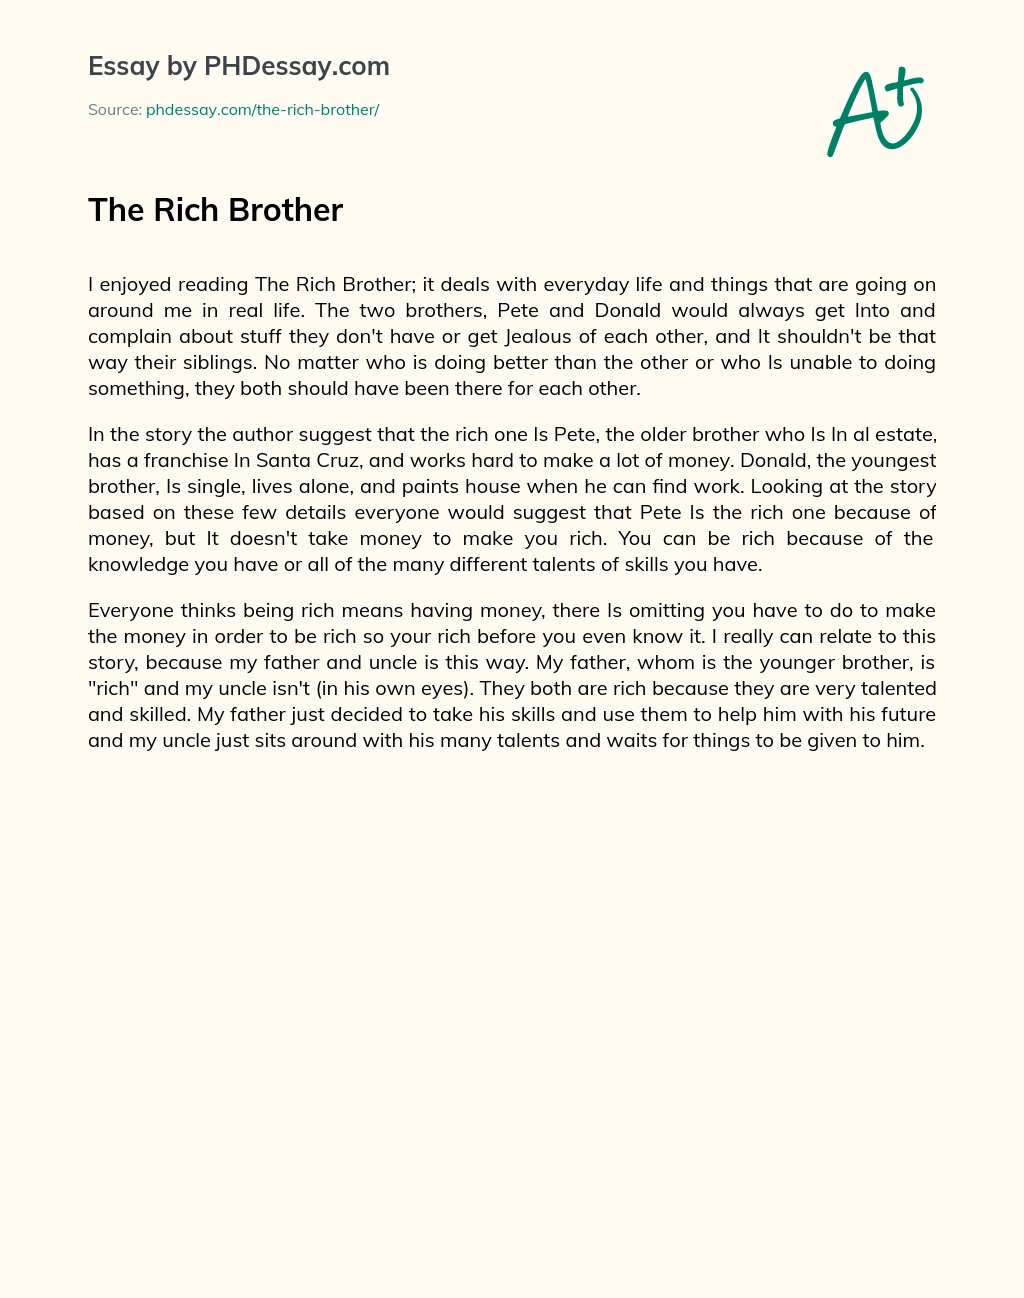 The Rich Brother essay